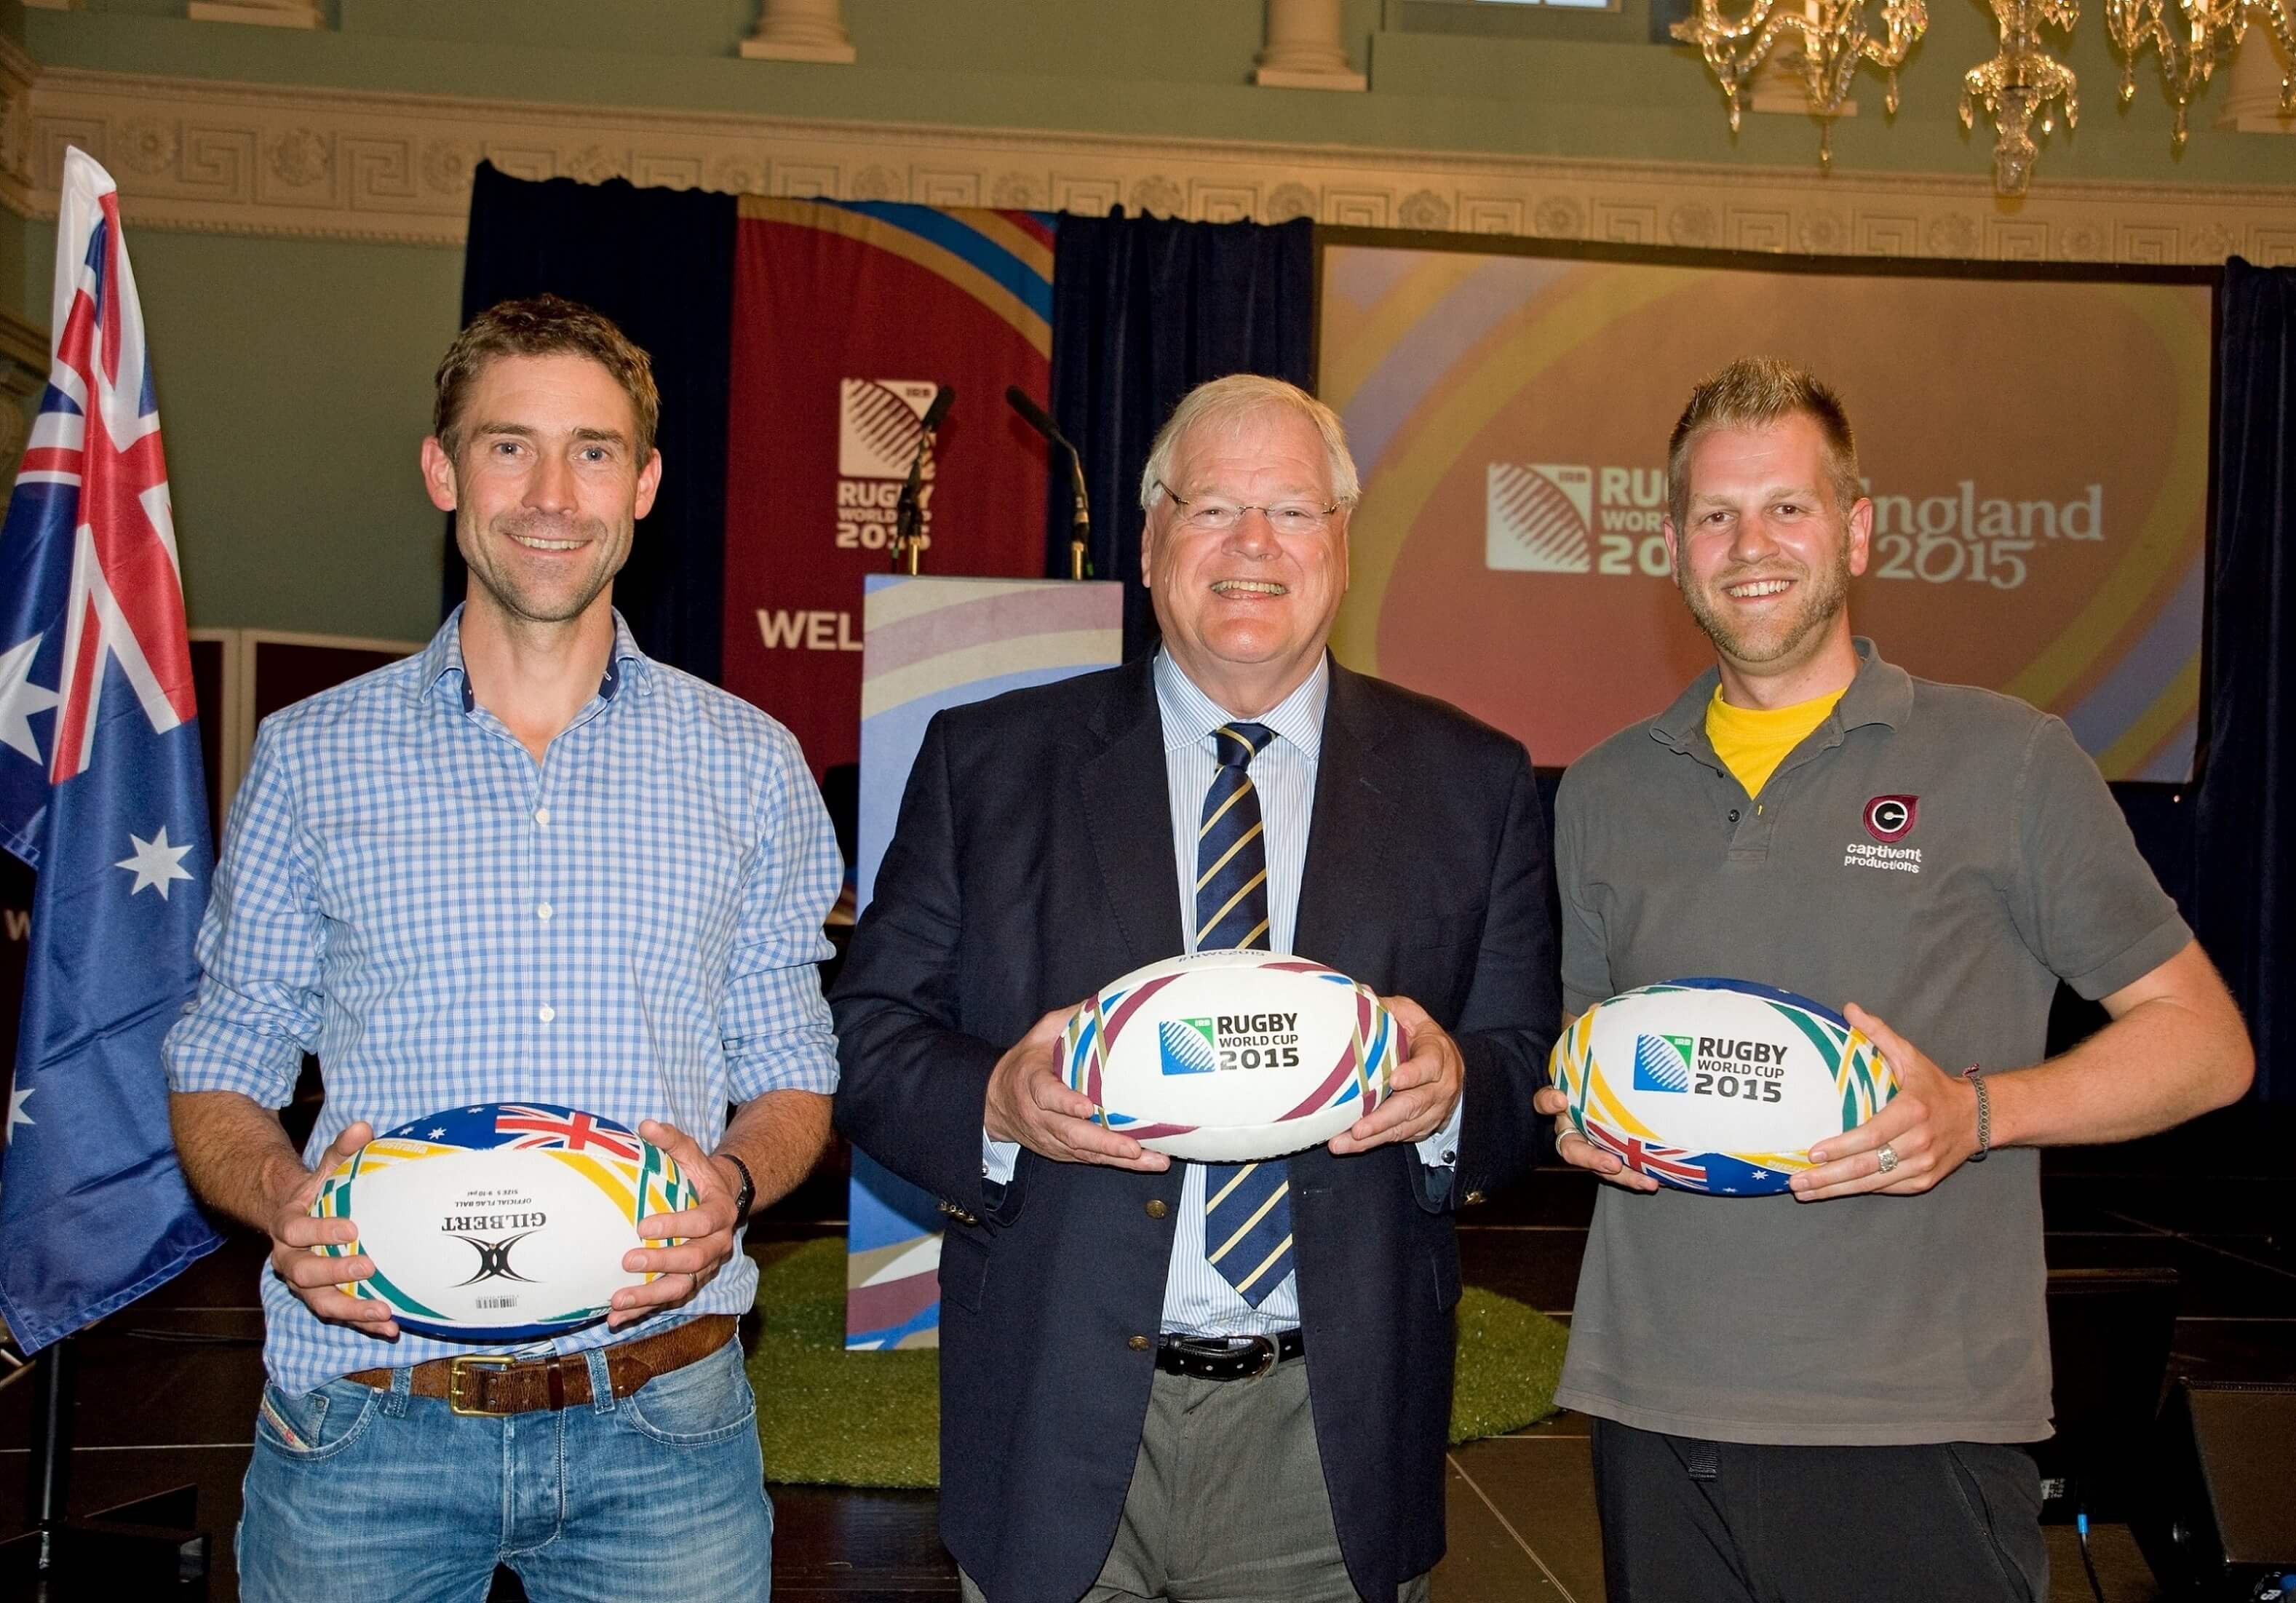 Event planning and management for the Rugby World Cup